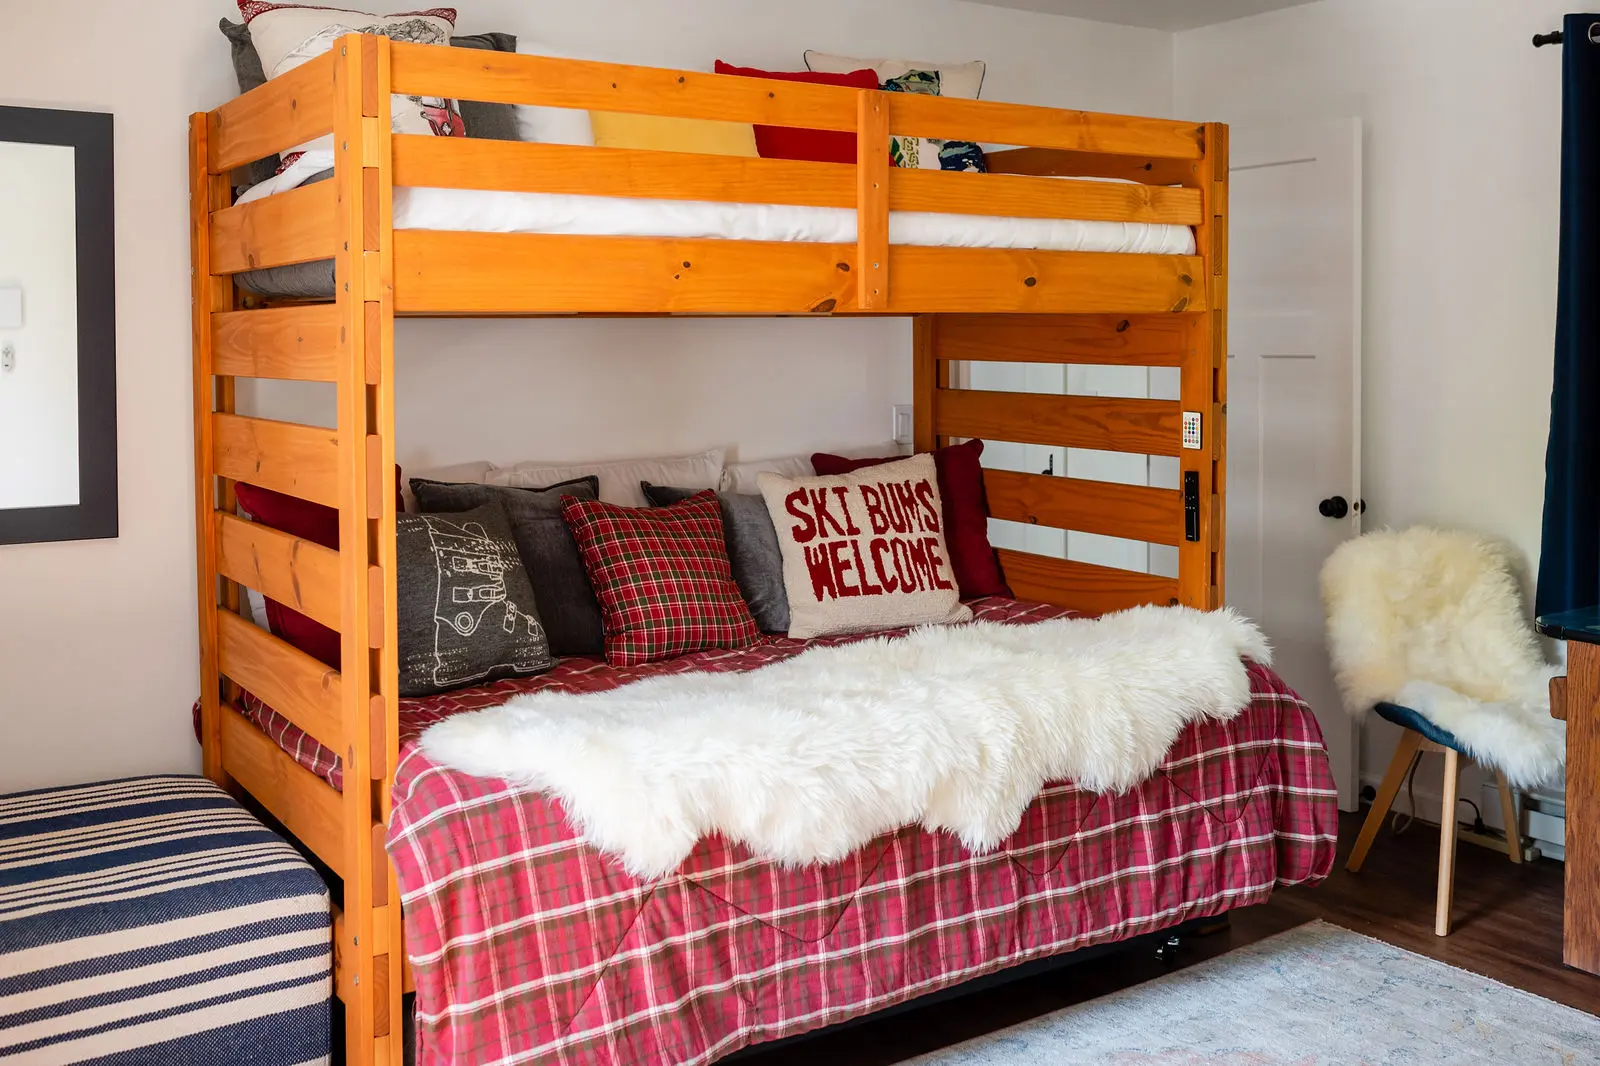 A bunk bed with red plaid sheets and pillows.